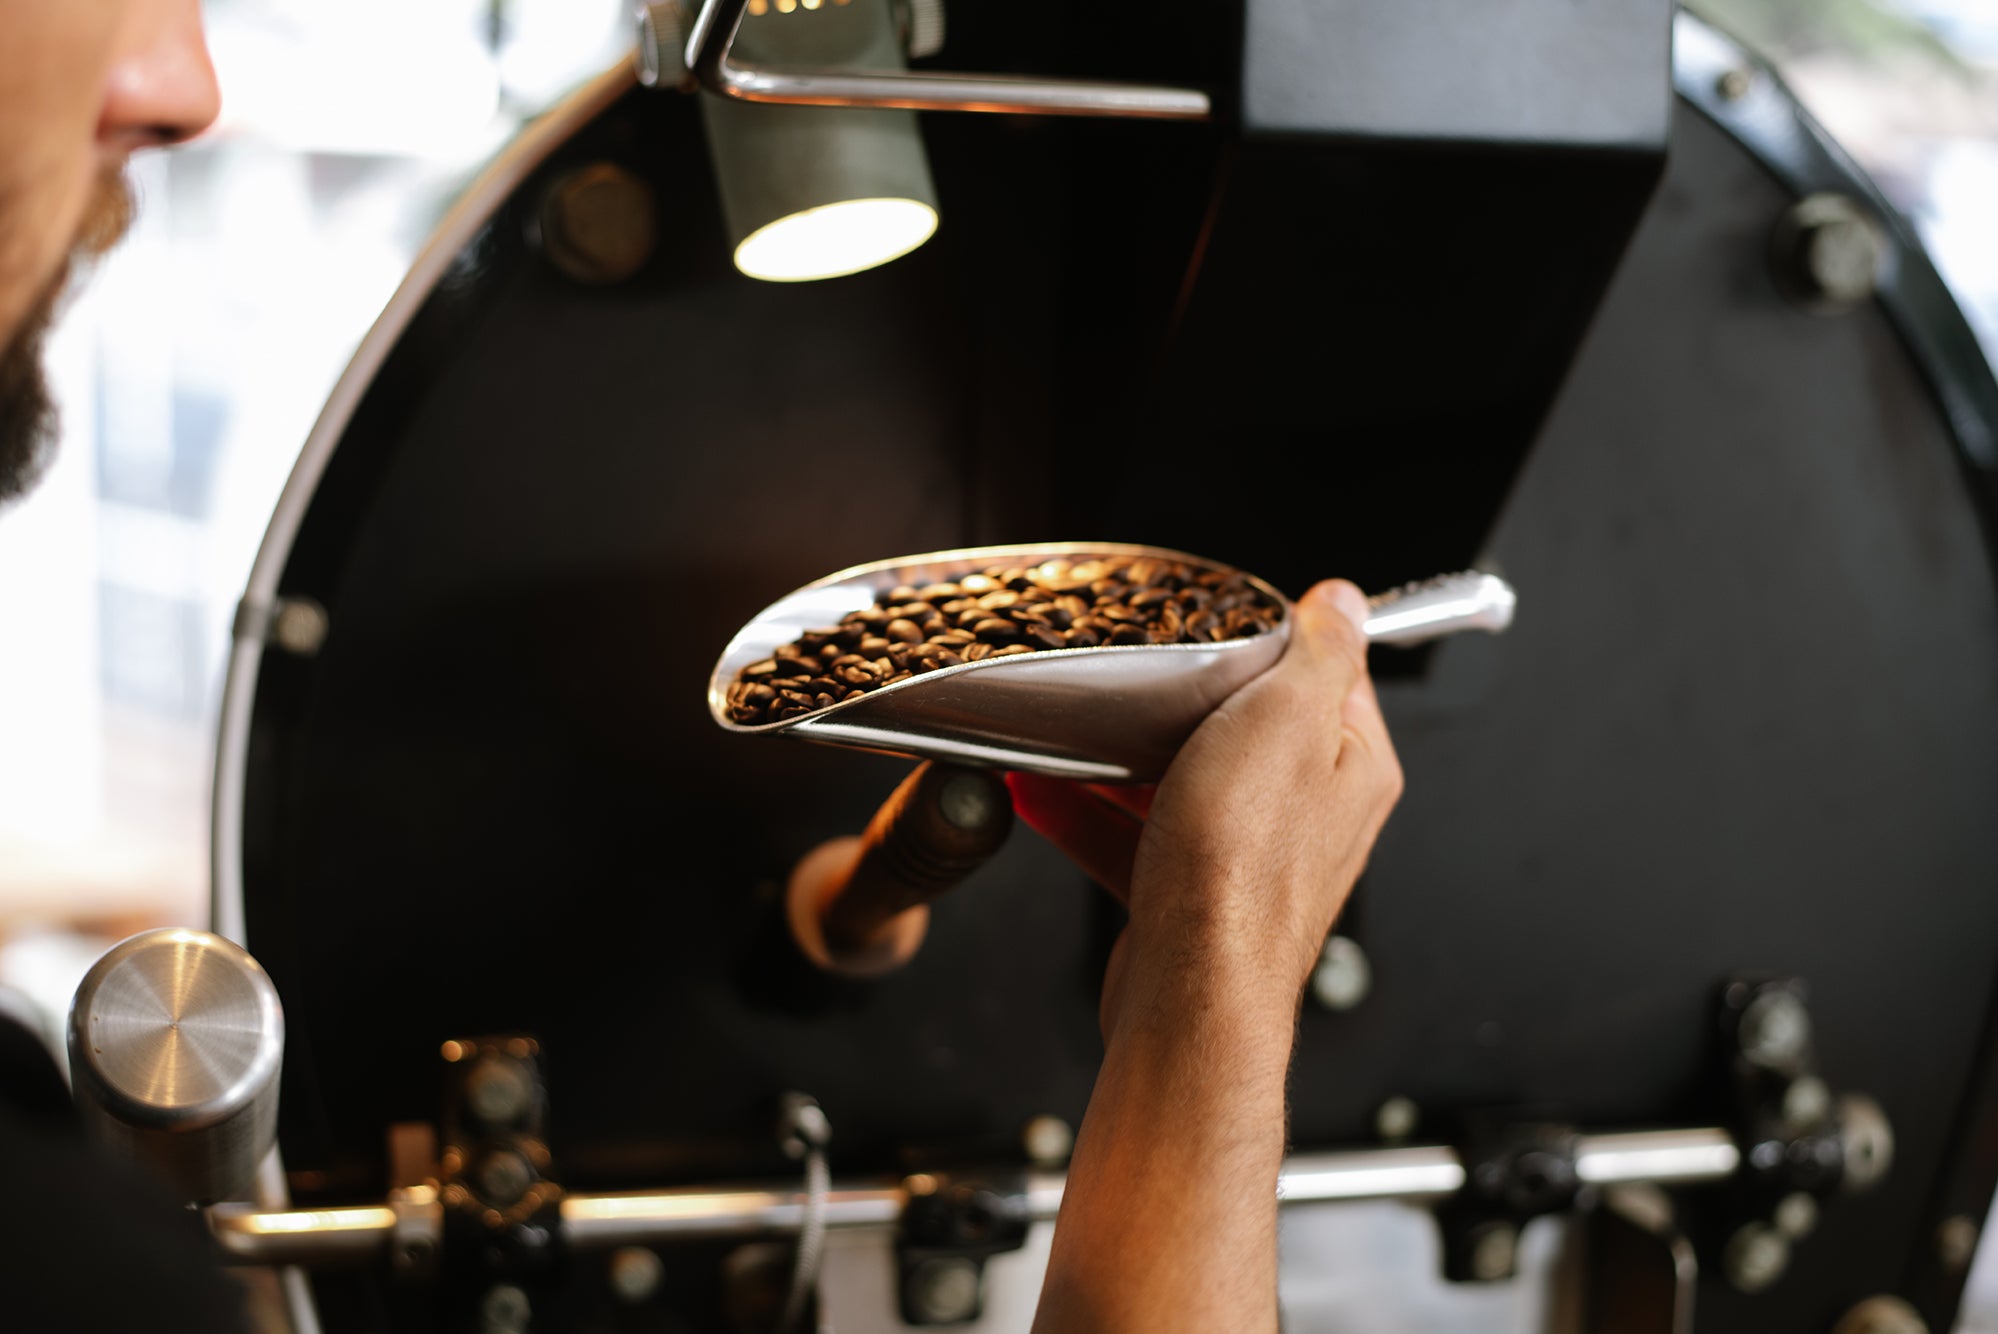 Danny Bolton inspecting coffee in the roasting process. PHOTO: Blake Wisz